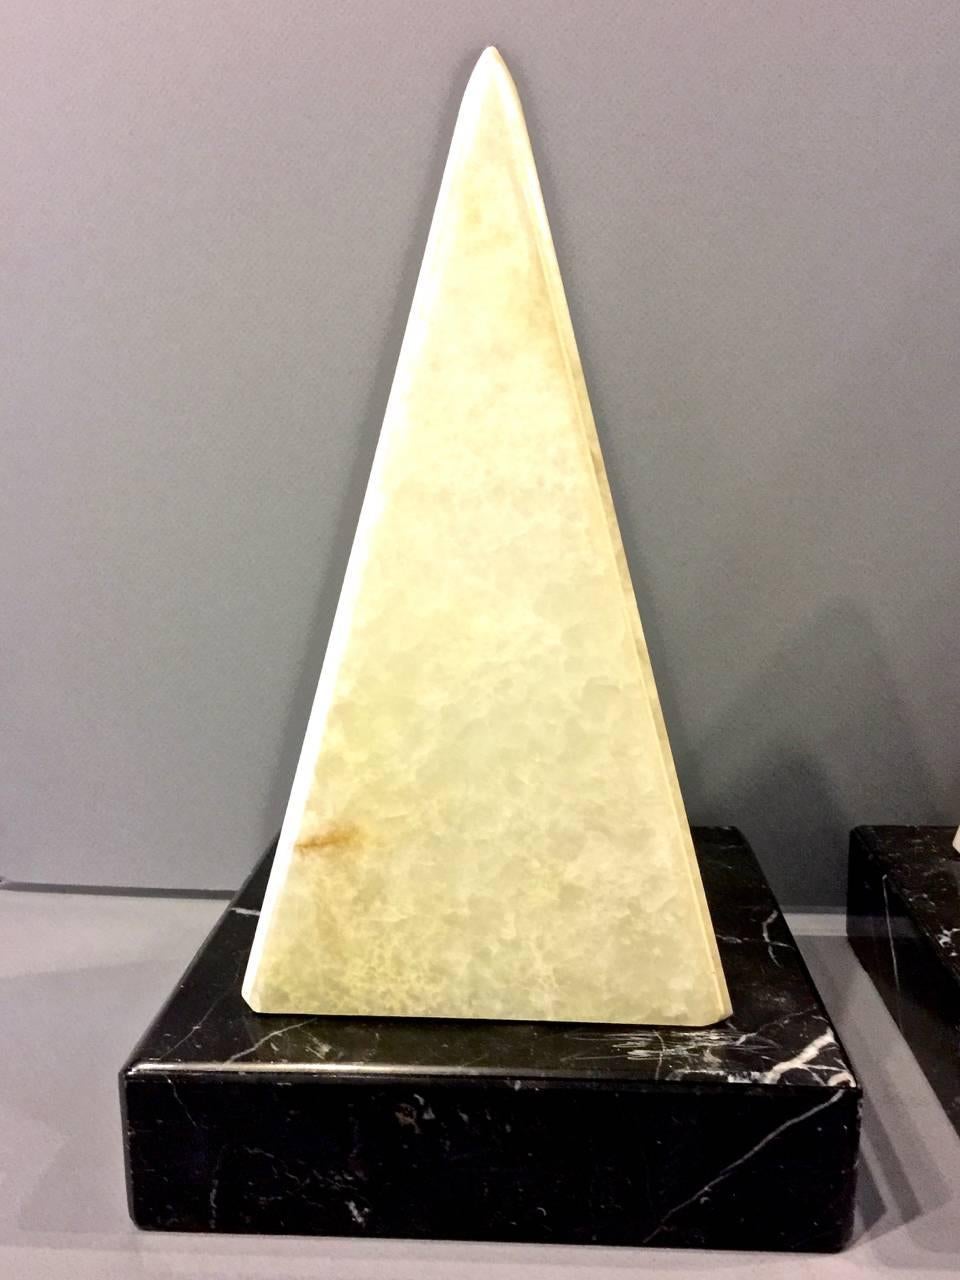 This is a very unusual pair of Mid-Century, circa 1960s alabaster and marble lamps in the form of obelisks. Unlit, the lamps appear to be simply obelisks; when lit, they become show stoppers.